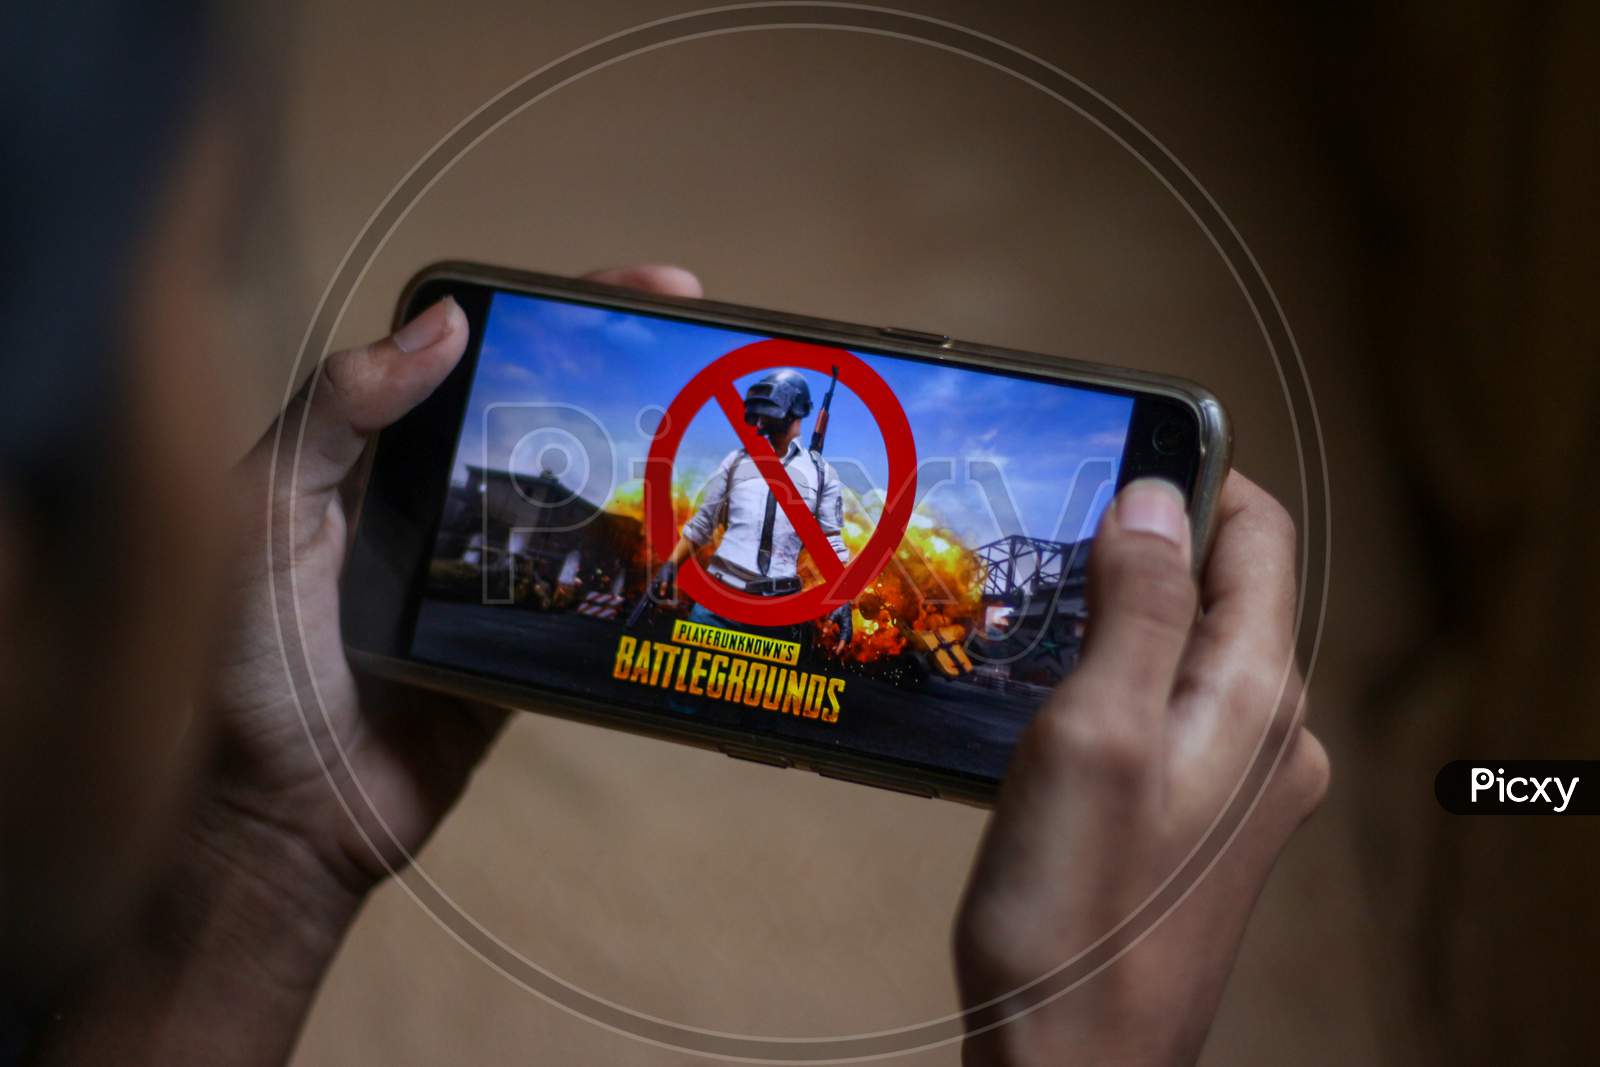 Pubg banned in country